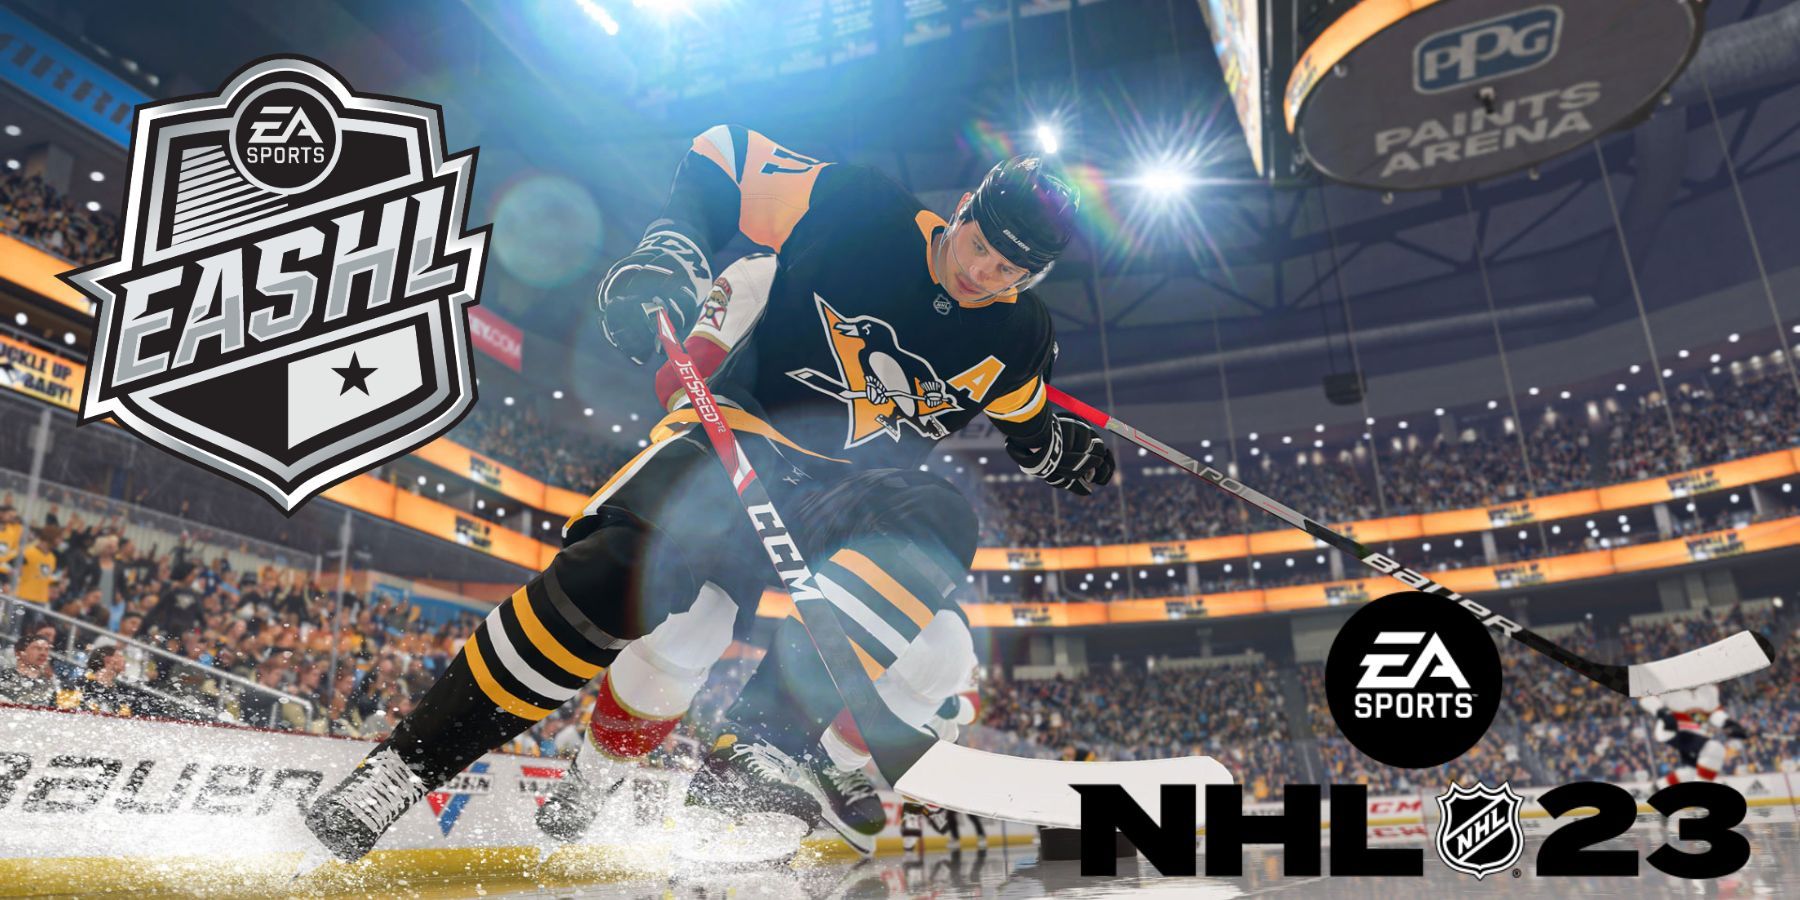 Players tussling on NHL 23 cover picture